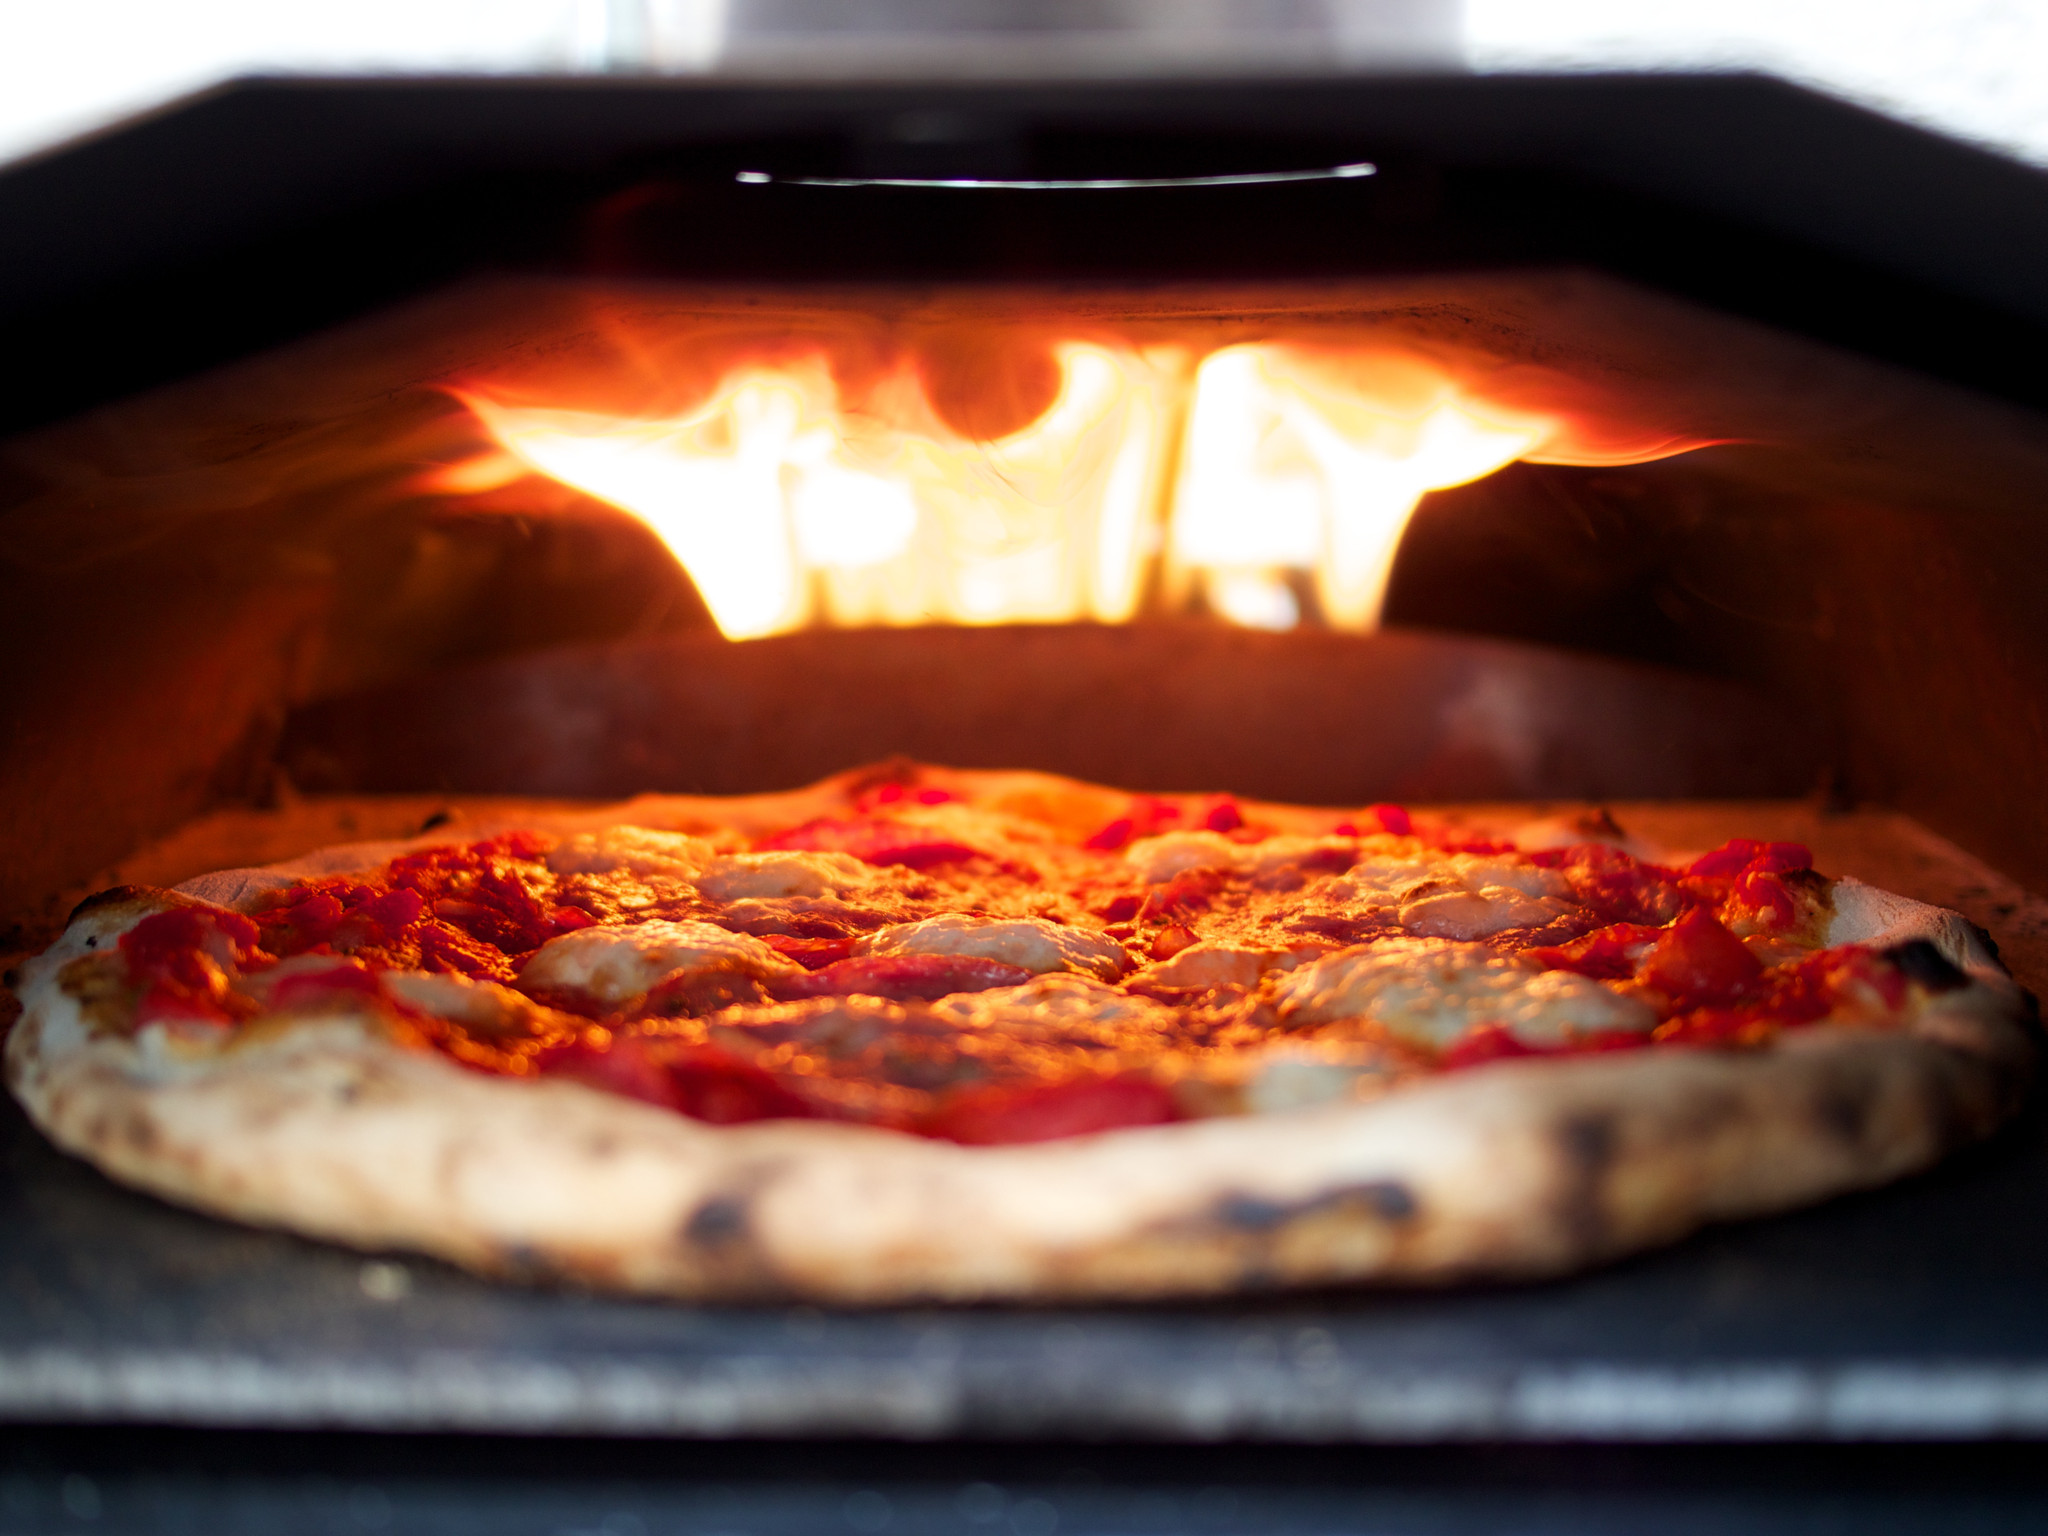 Uuni 2 - Wood-Fired Oven for Pizza and Beyond | Stove | Pinterest ...